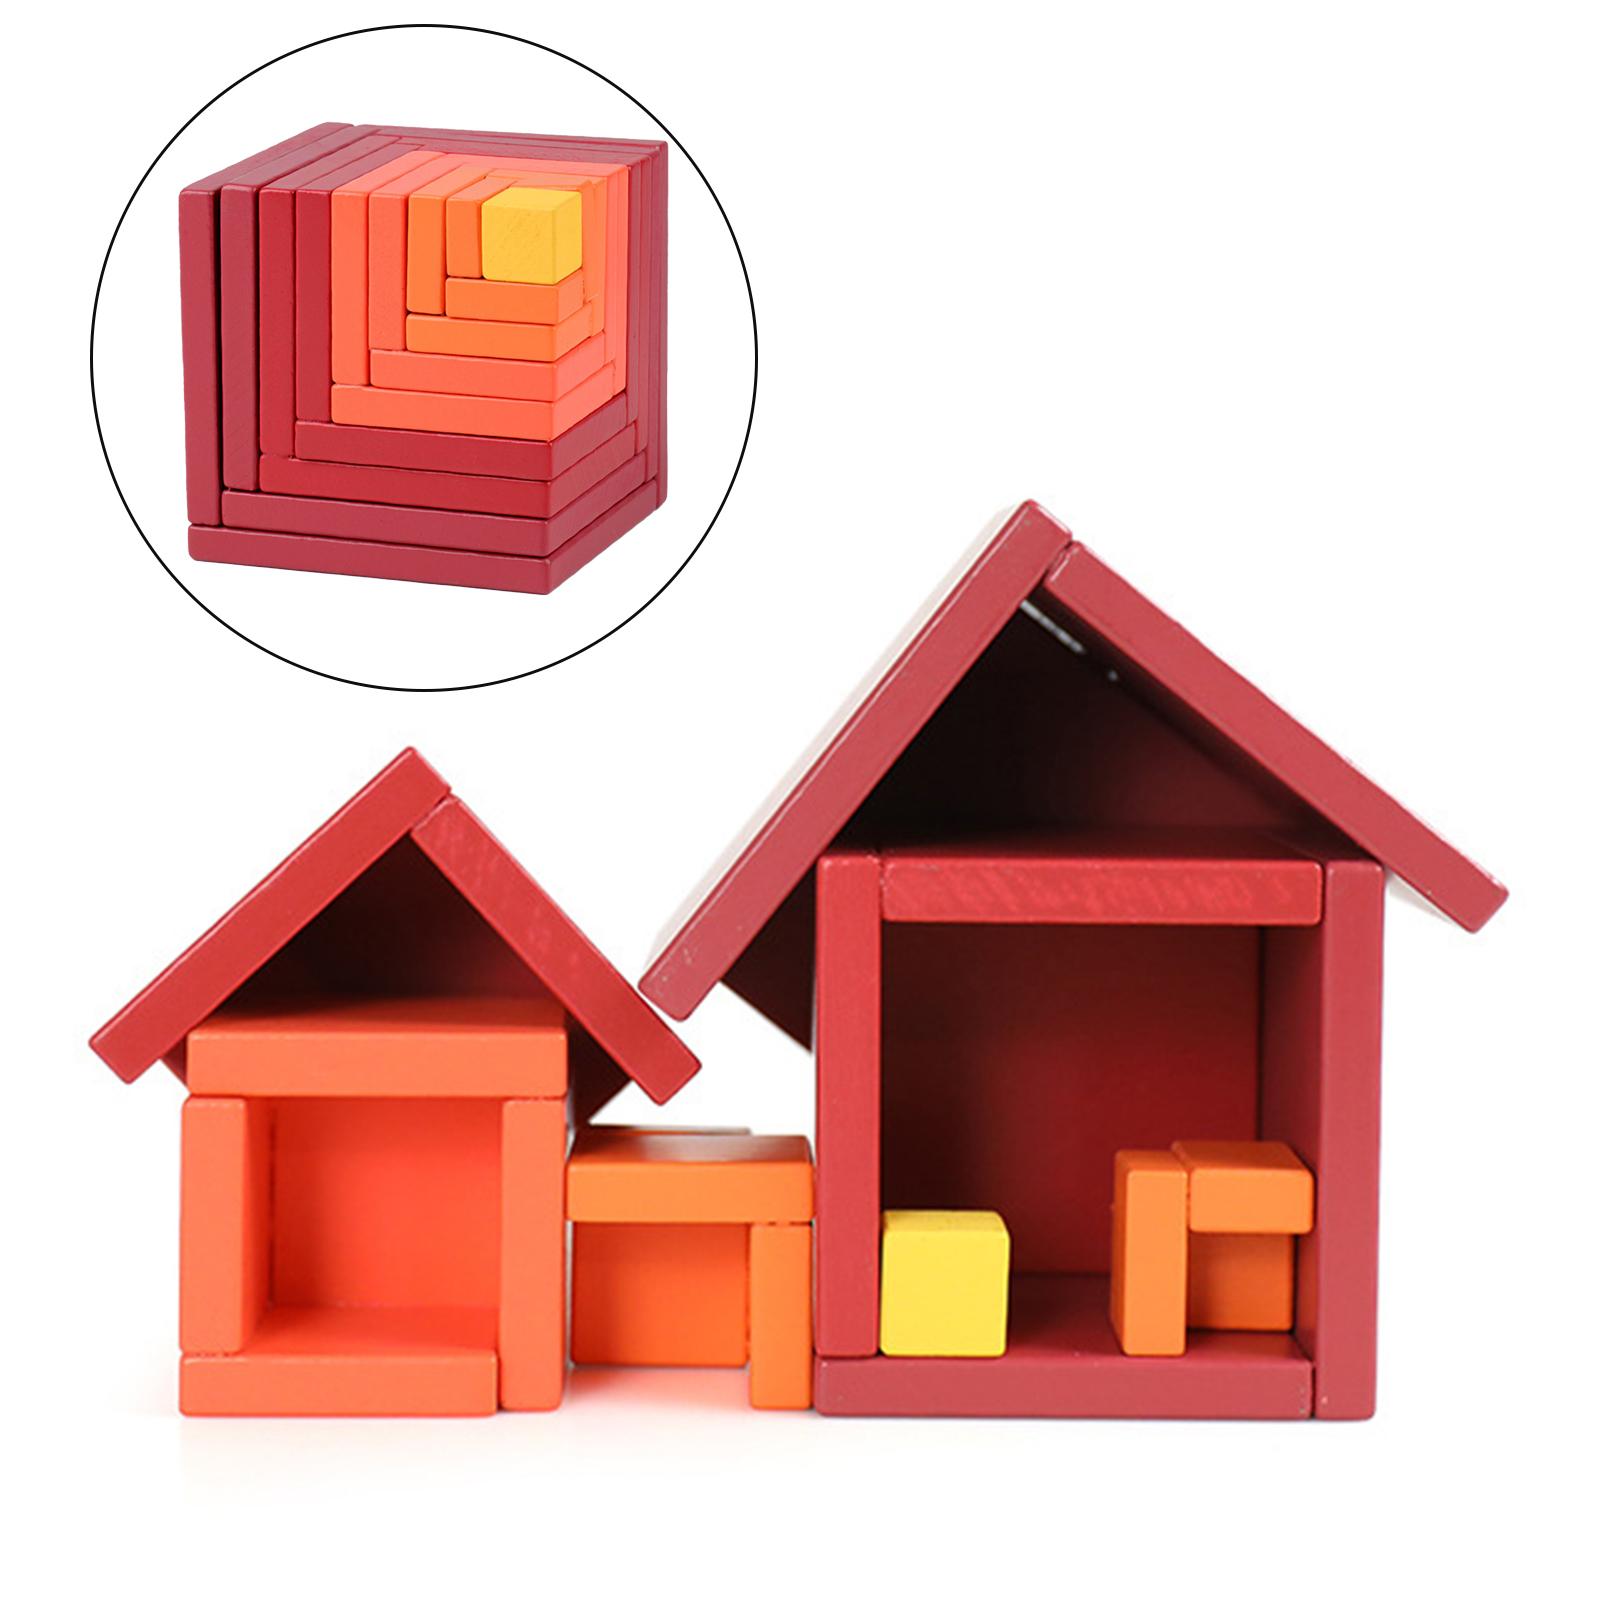 3D Puzzle  Building Blocks Educational Tiles Toy Stress Relief Intelligence Developing Brain Teaser Travel Games Toy for Kids Adult Age 4-6 Years